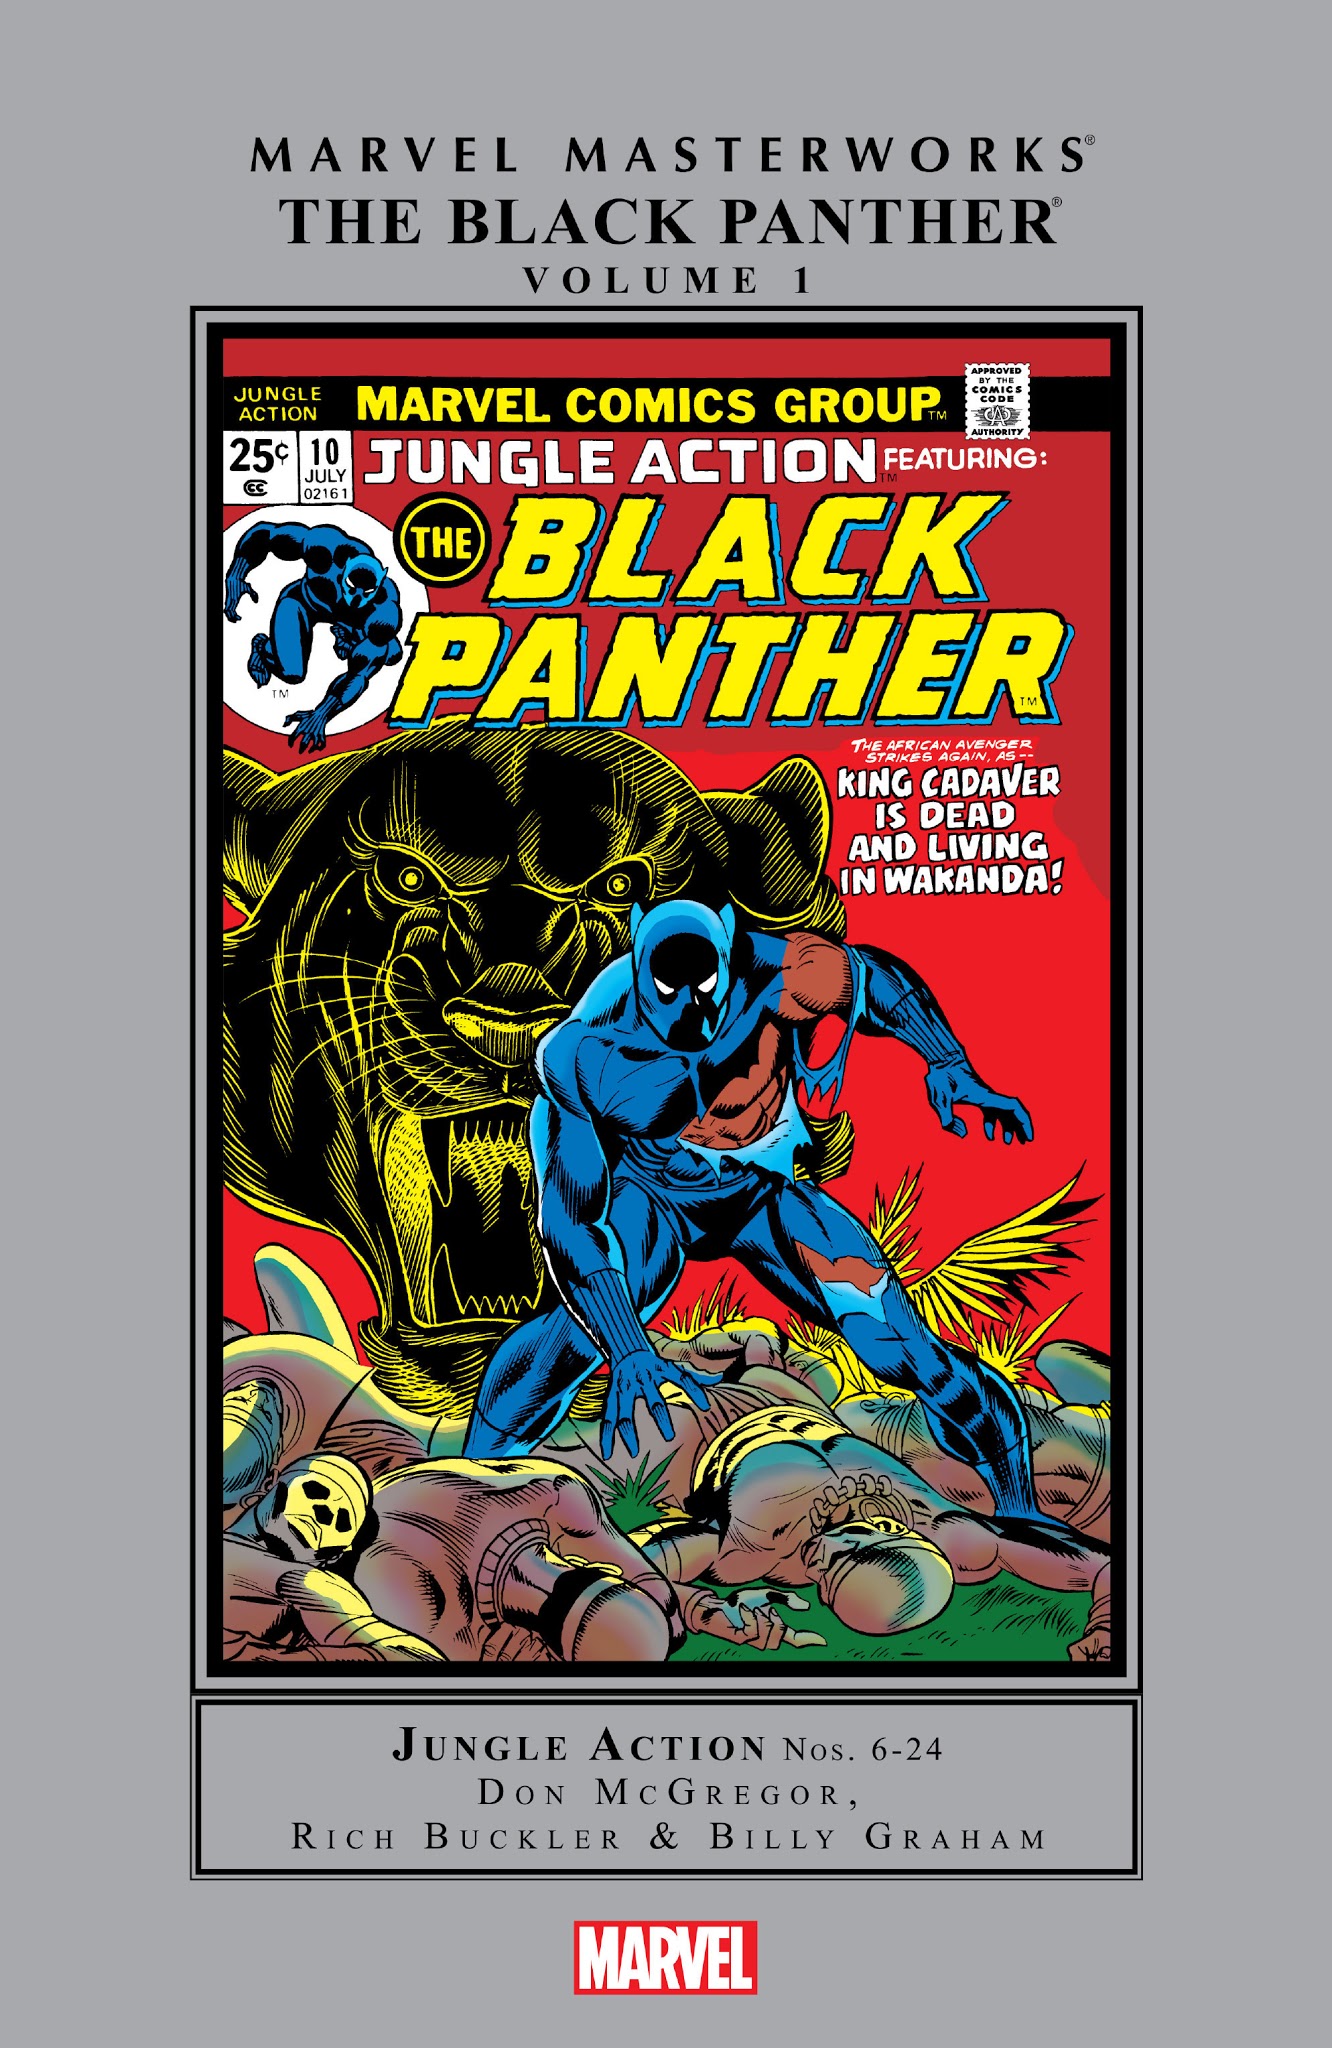 Read online Marvel Masterworks: The Black Panther comic -  Issue # TPB 1 - 1